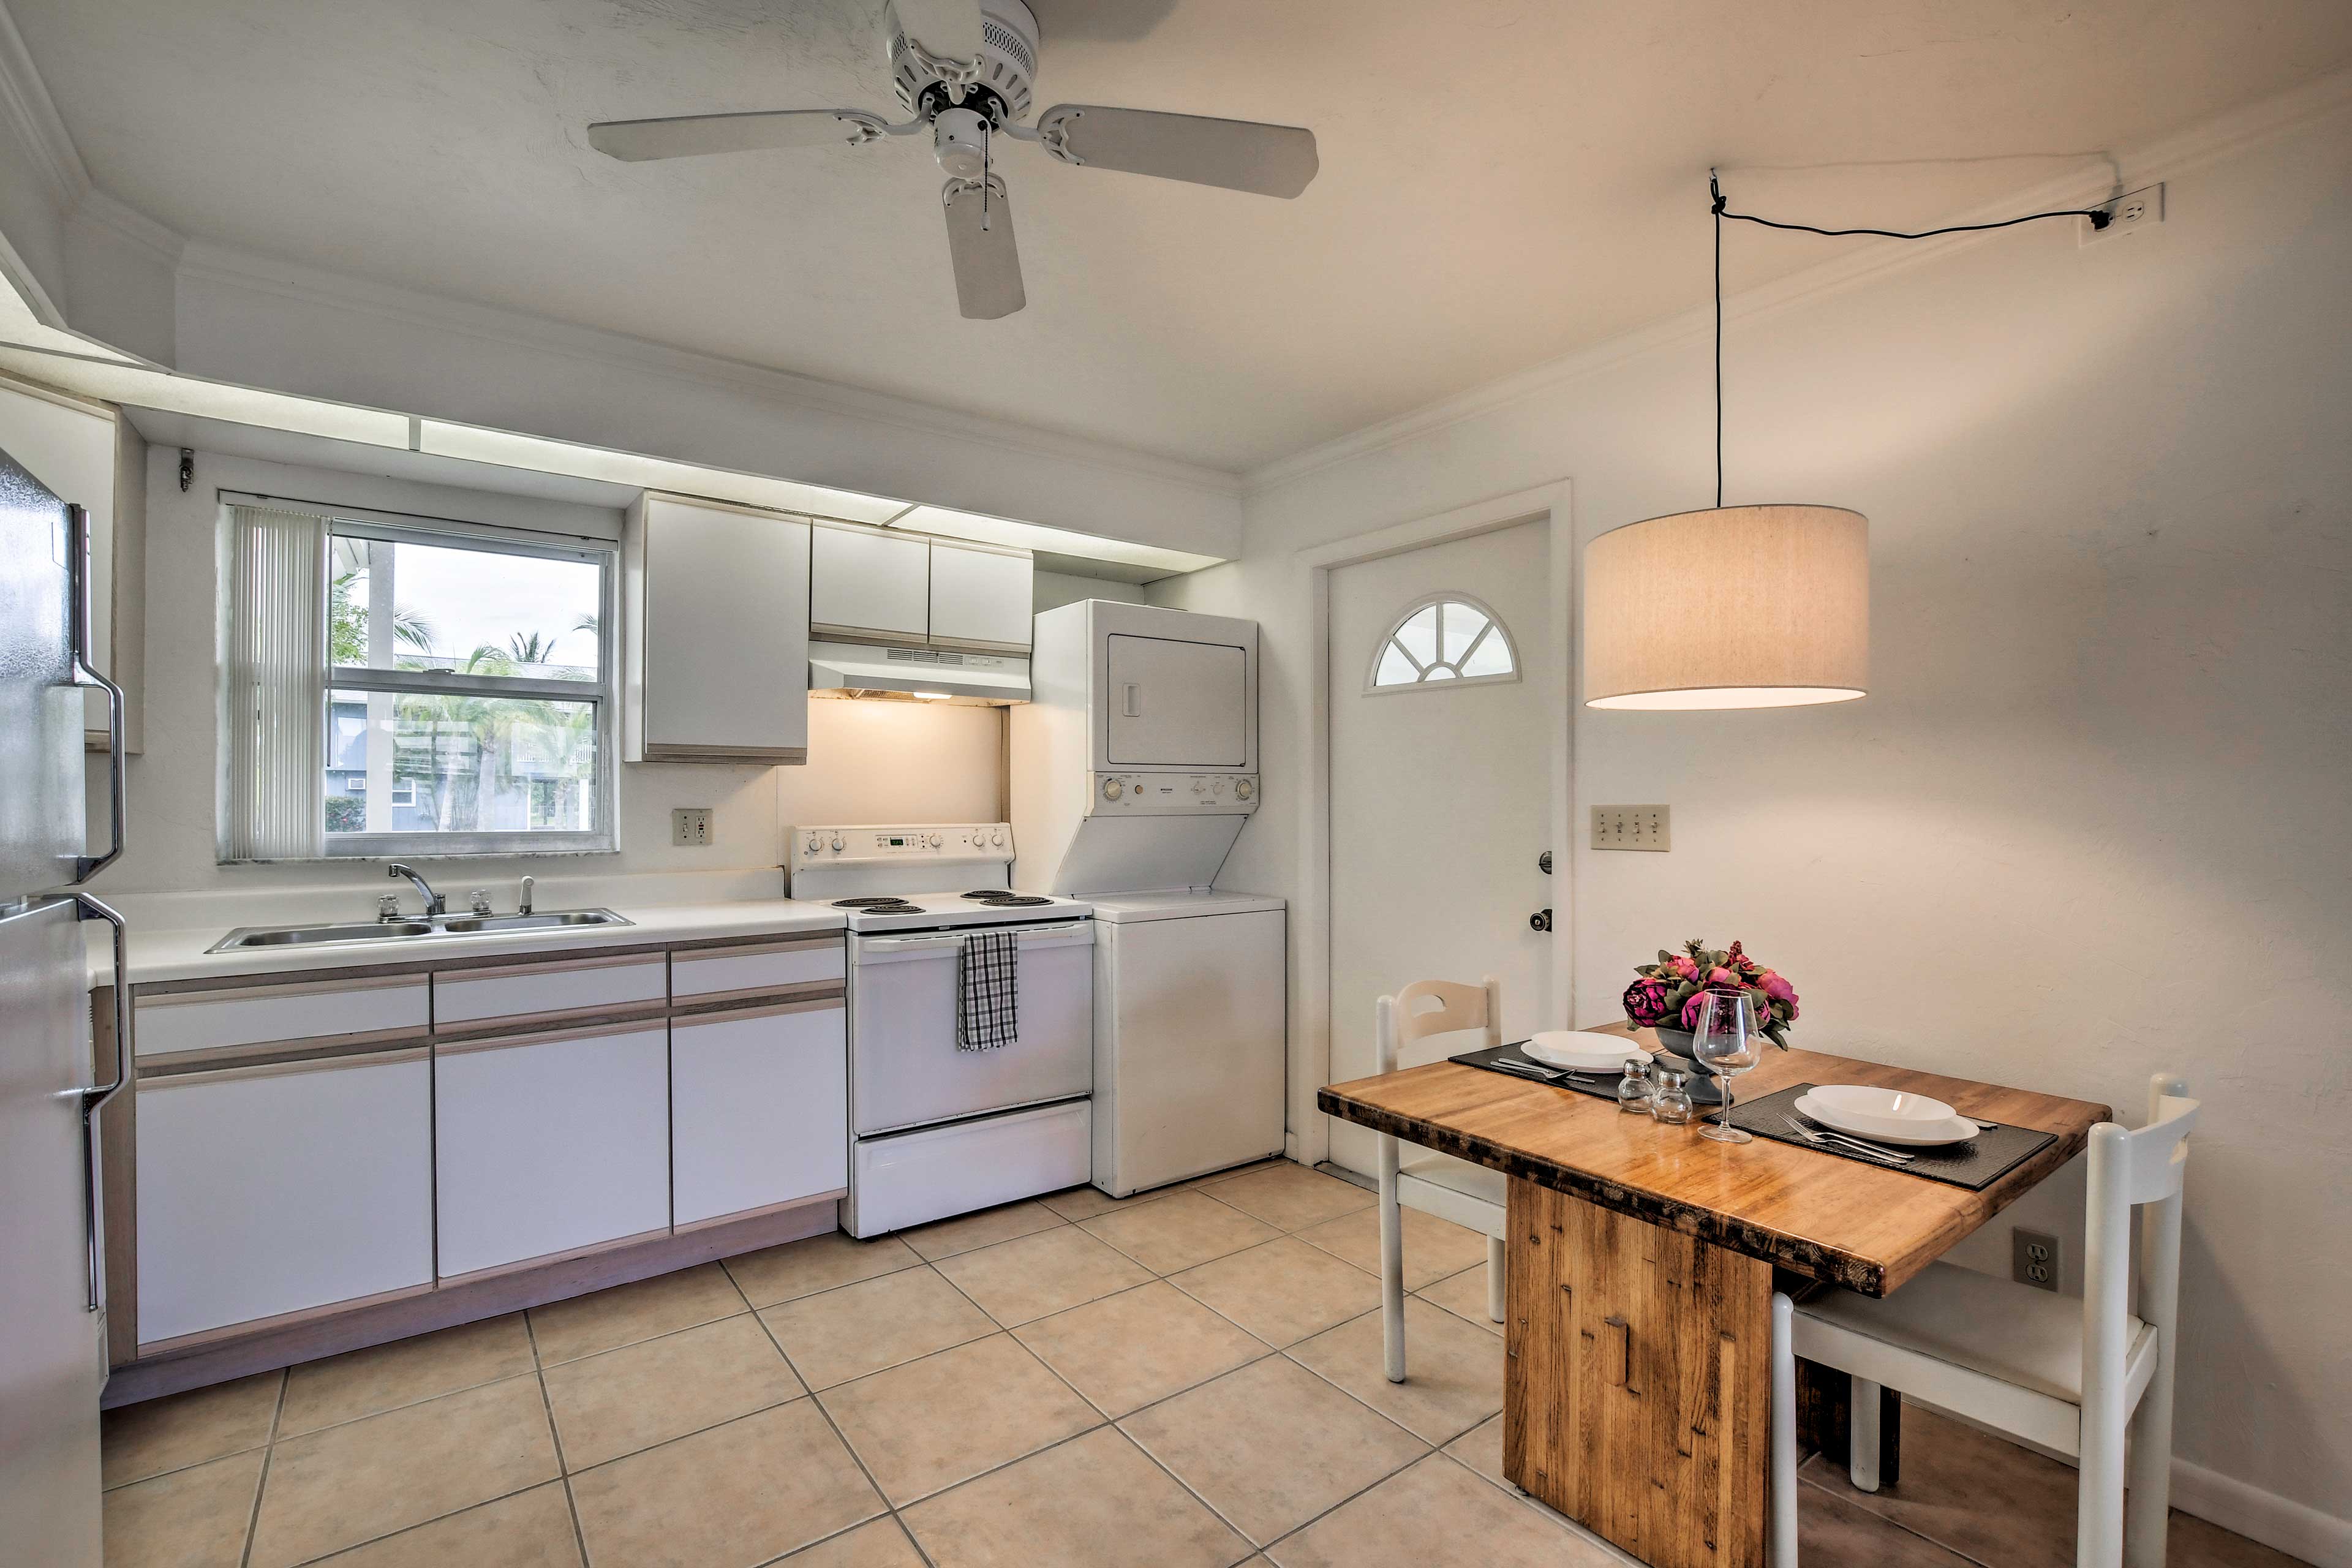 The fully equipped kitchen features everything you'll need to whip up dinner.